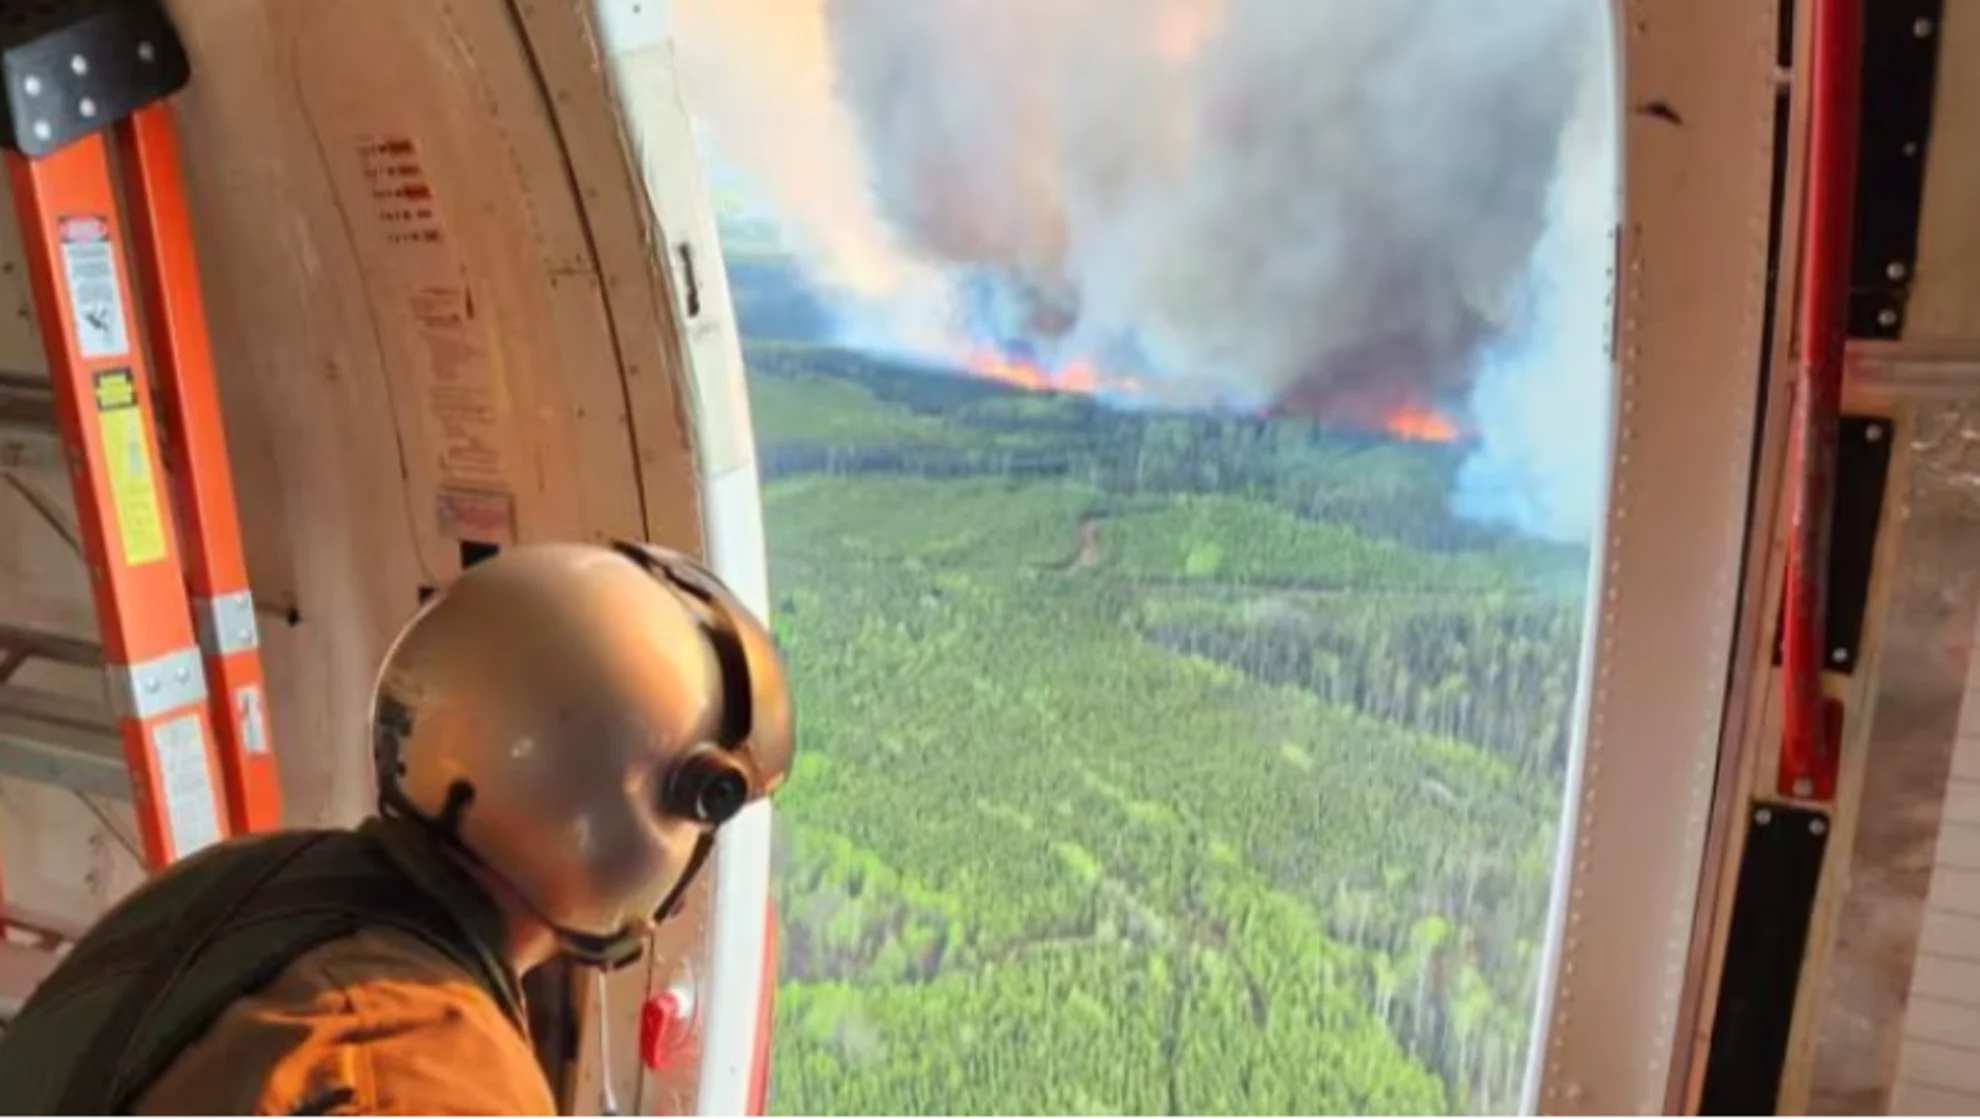 With parts of Quebec at extreme risk for wildfires this season, here are some key wildfire triggers and how to prevent them from happening.